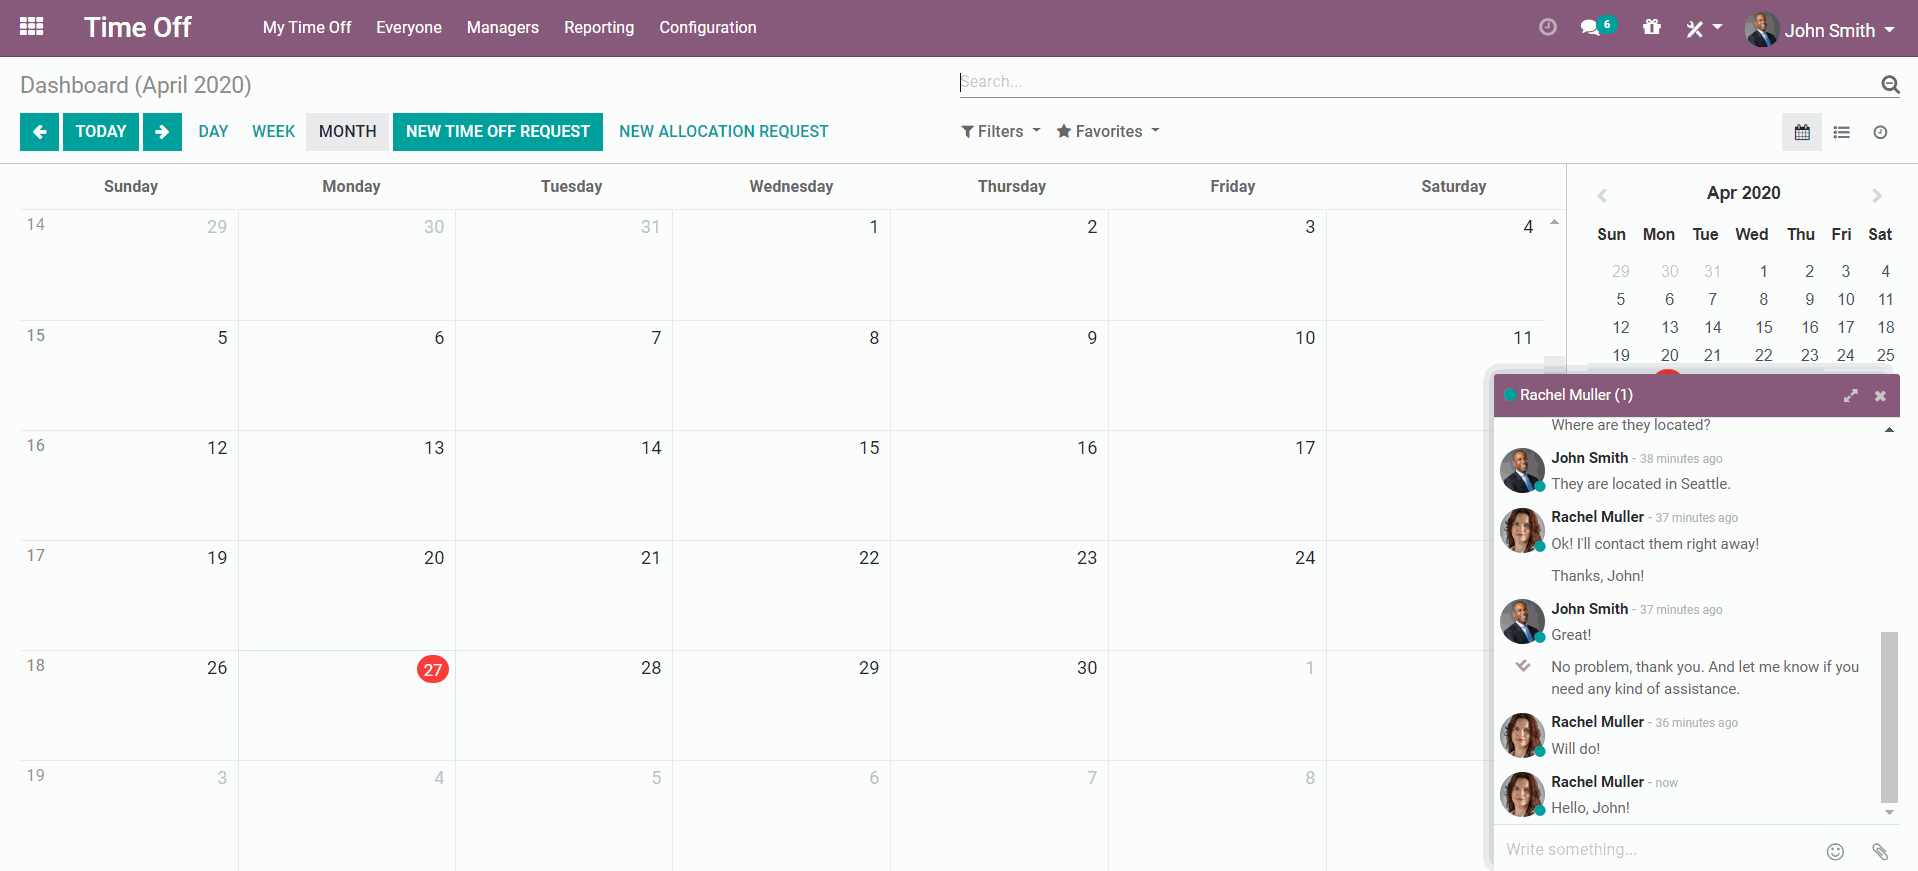 Odoo Calendar's interface with the Discuss app open in the bottom right corner of the screen